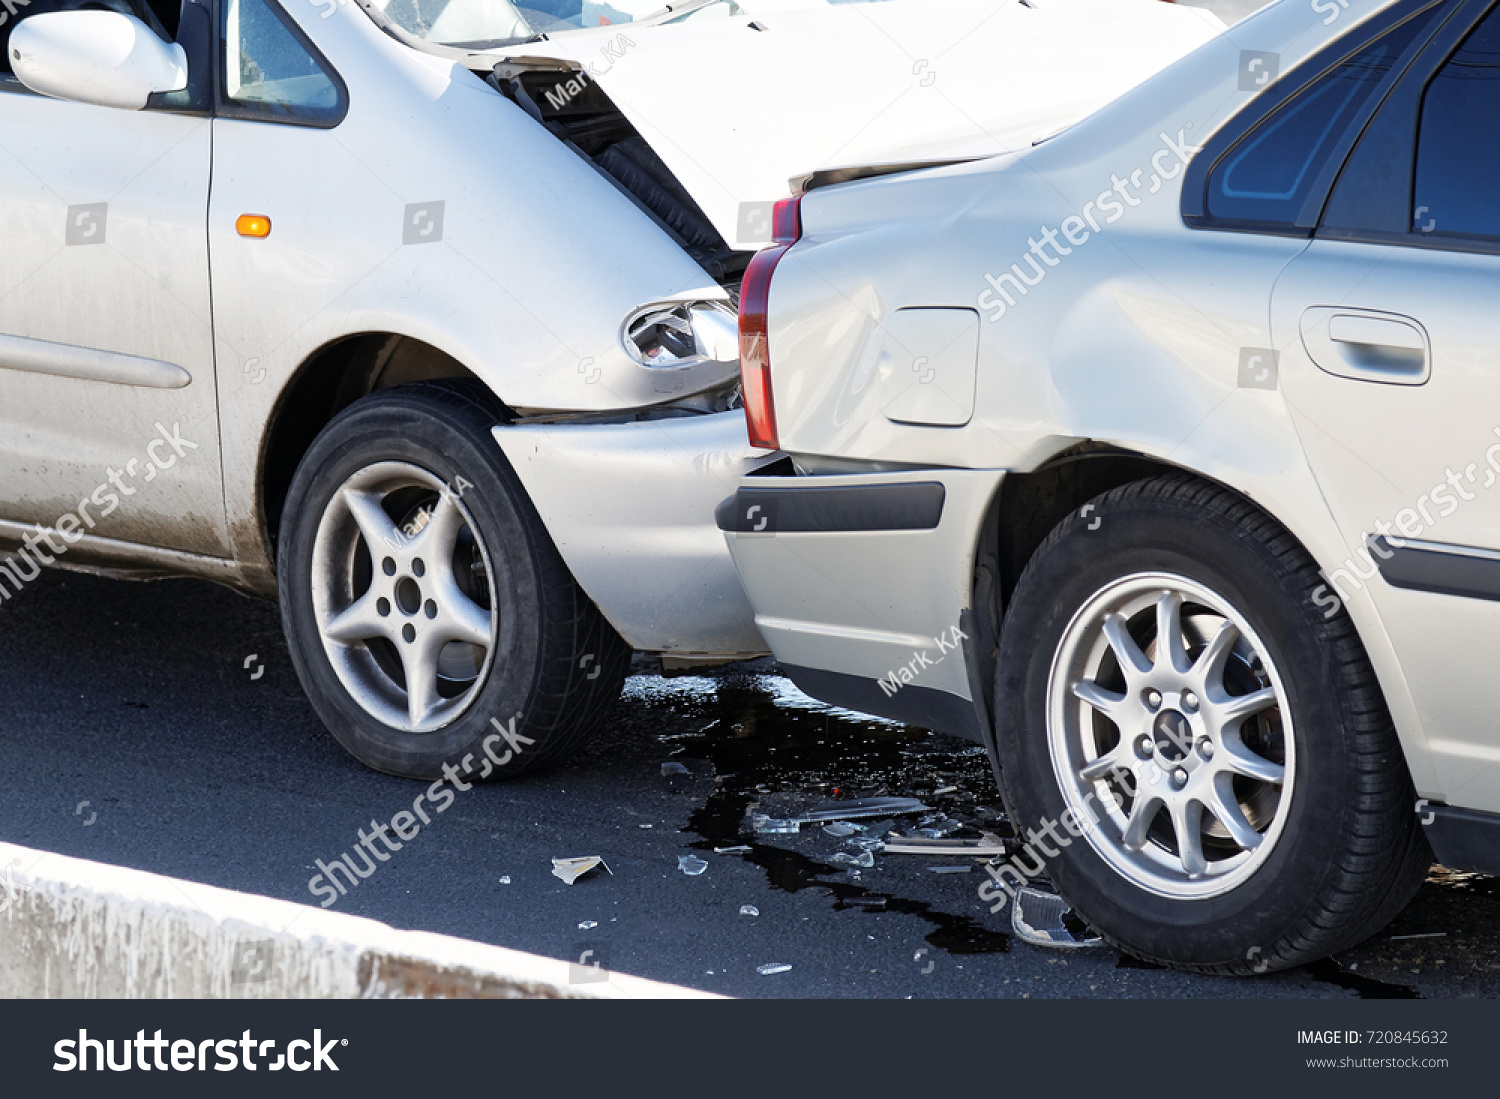 Two cars in a car accident on street. Closeup damaged automobiles after collision in city. Insurance case. #720845632